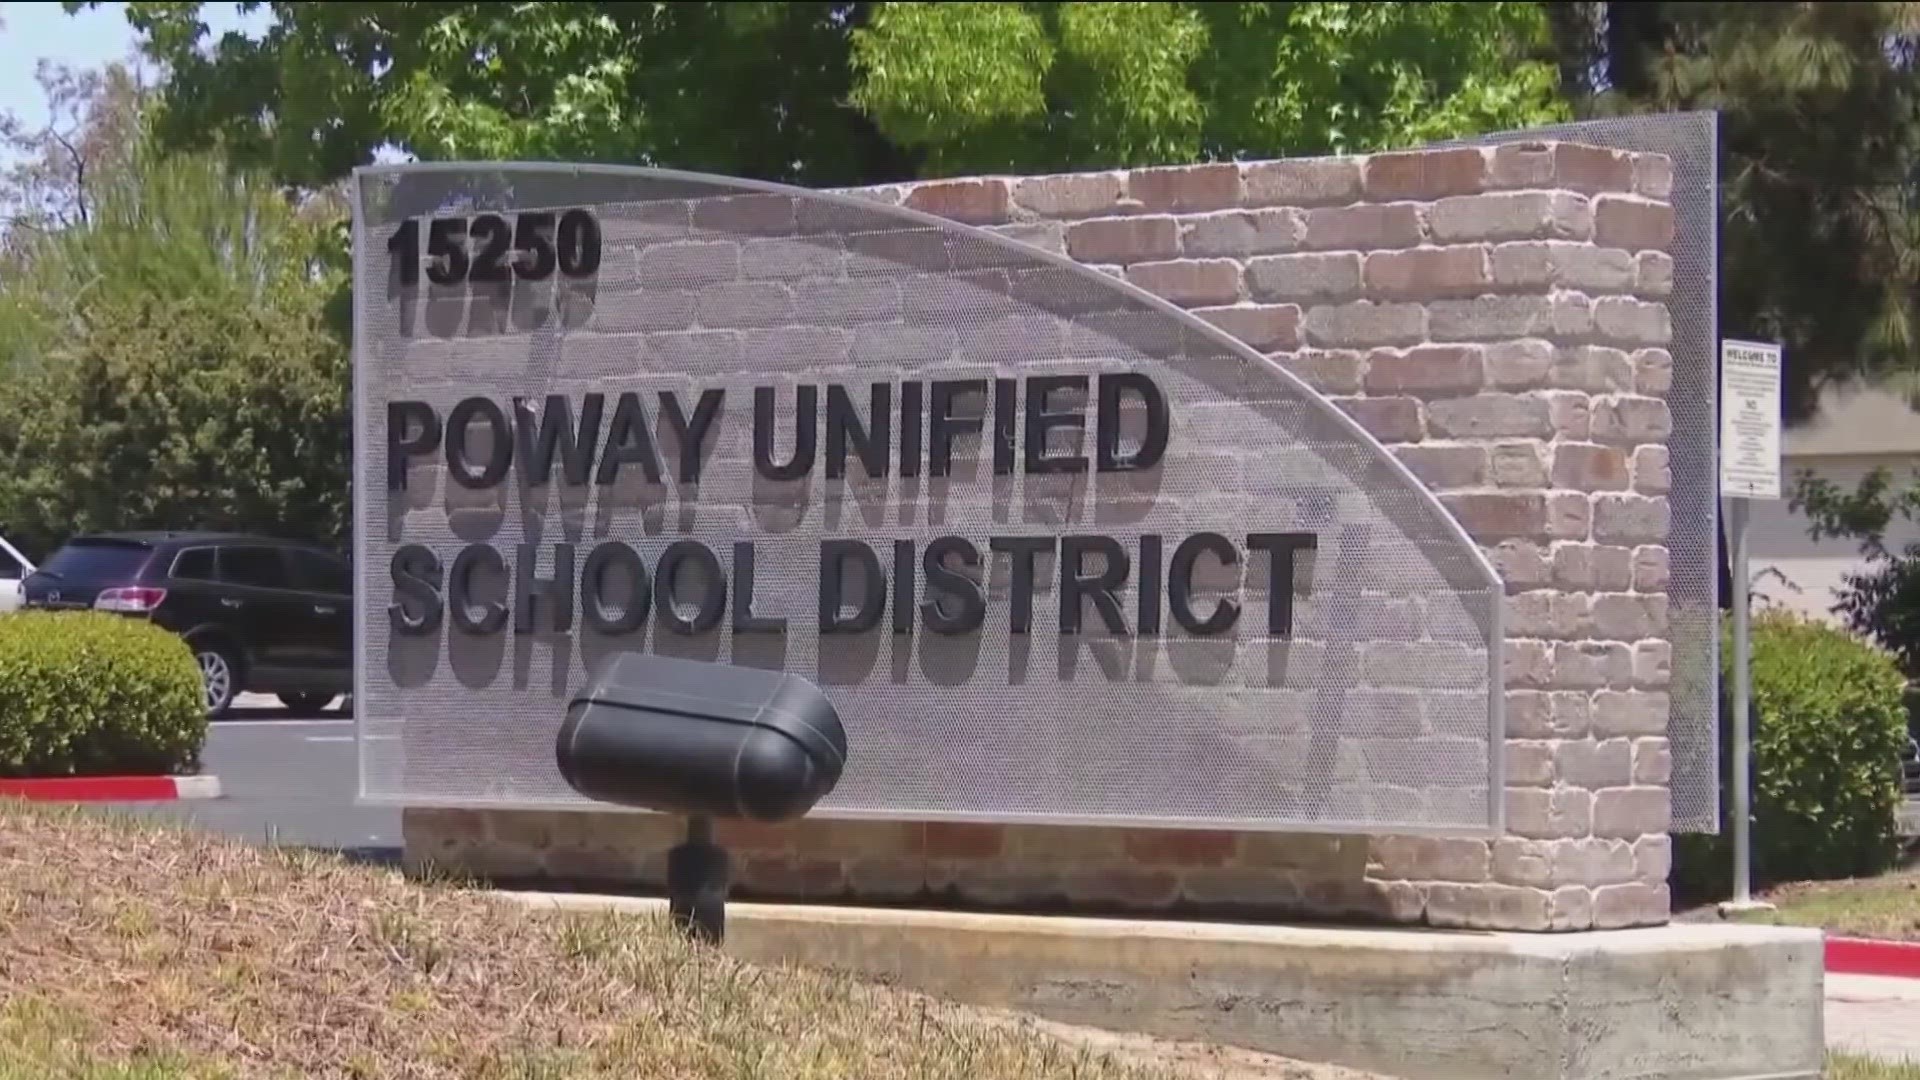 The first case involves two elected members from the Poway Unified School District Board of Trustees.